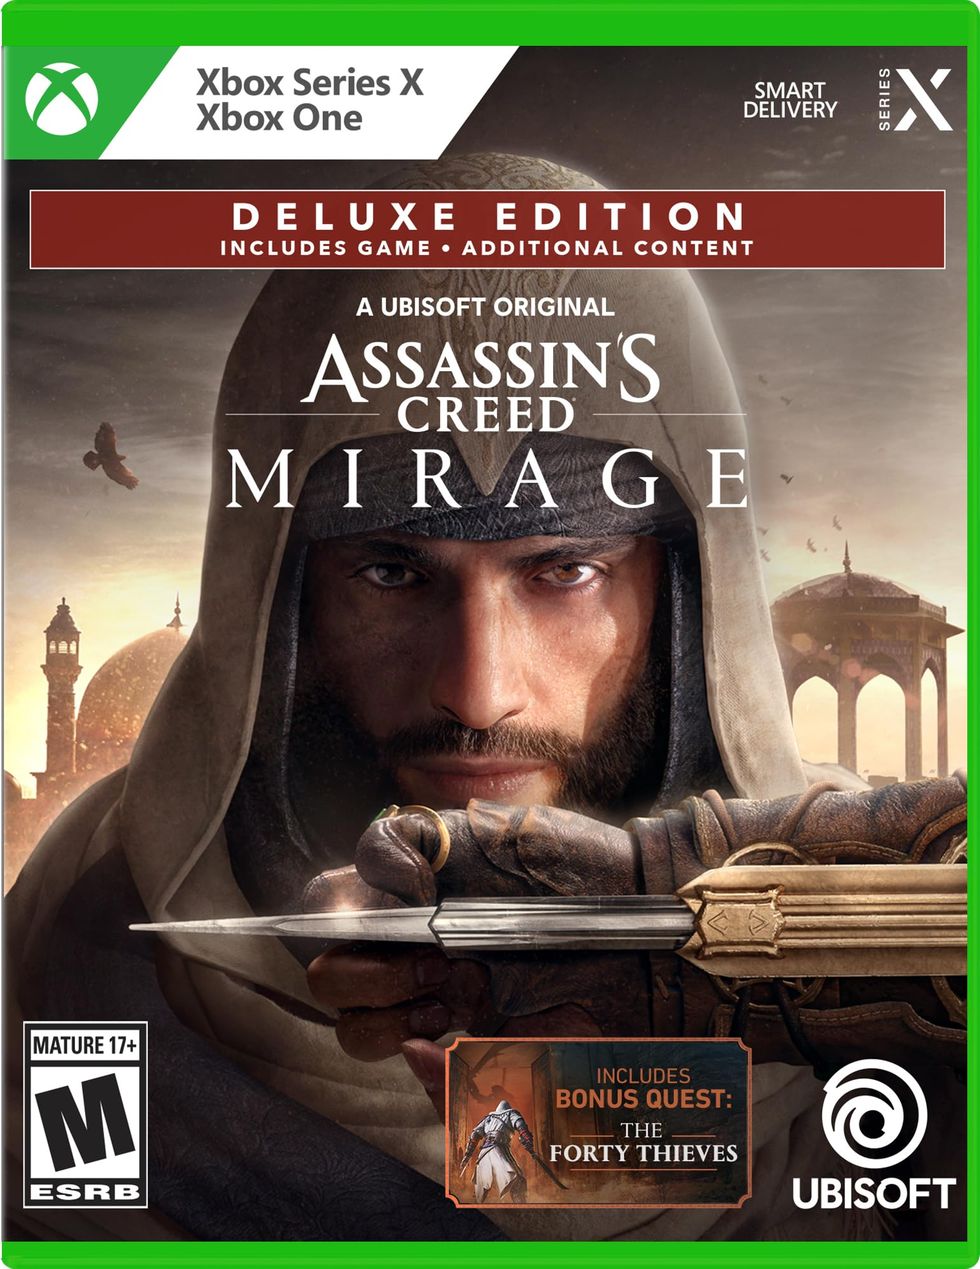 ASSASSIN'S CREED MIRAGE - DELUXE EDITION, XBOX X